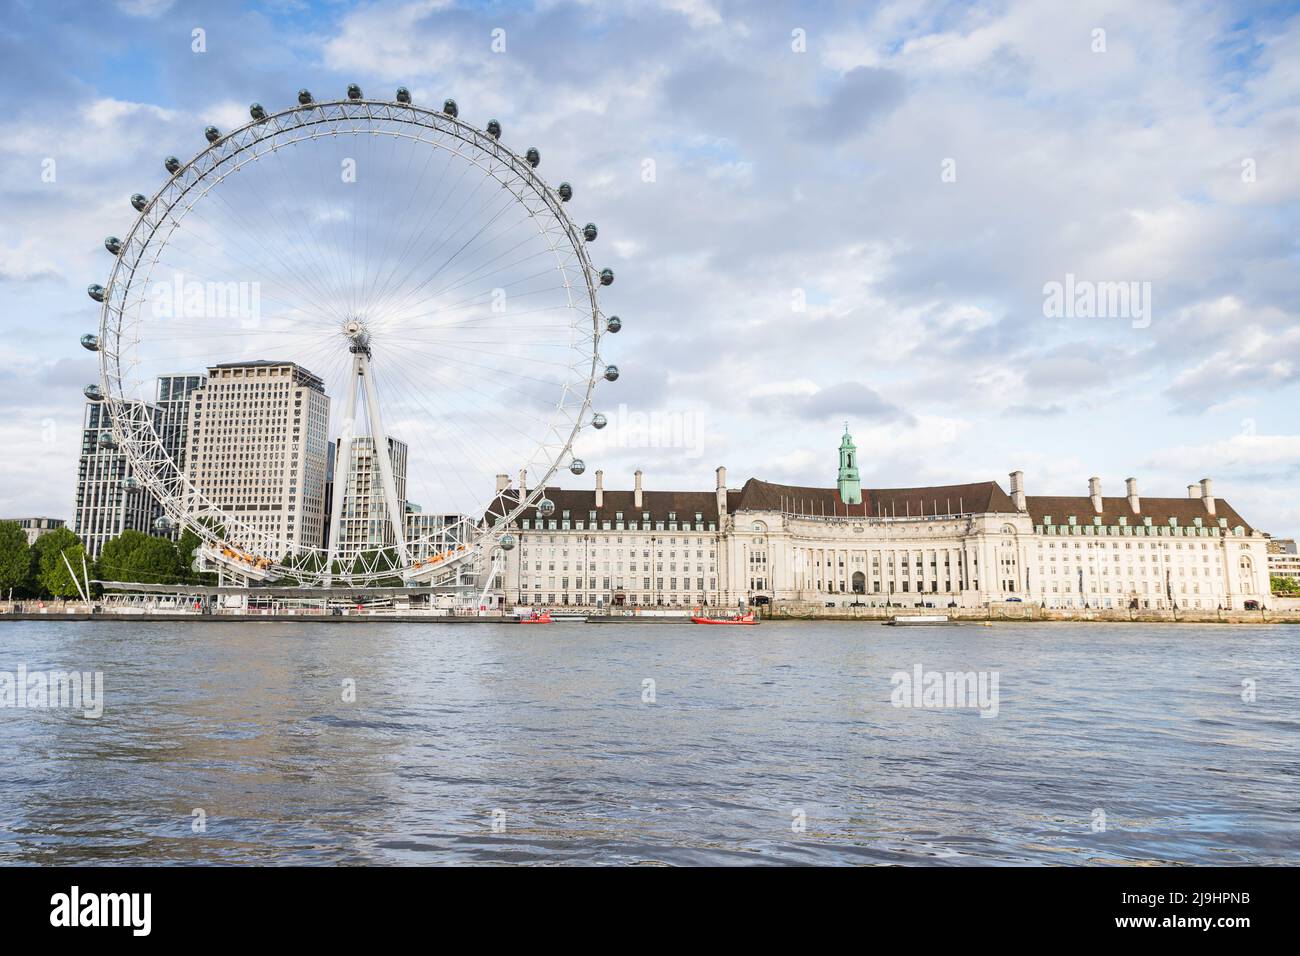 The massive London Eye ferris wheel on the edge of the River Thames in London pictured under a bright sky in May 2022. Stock Photo